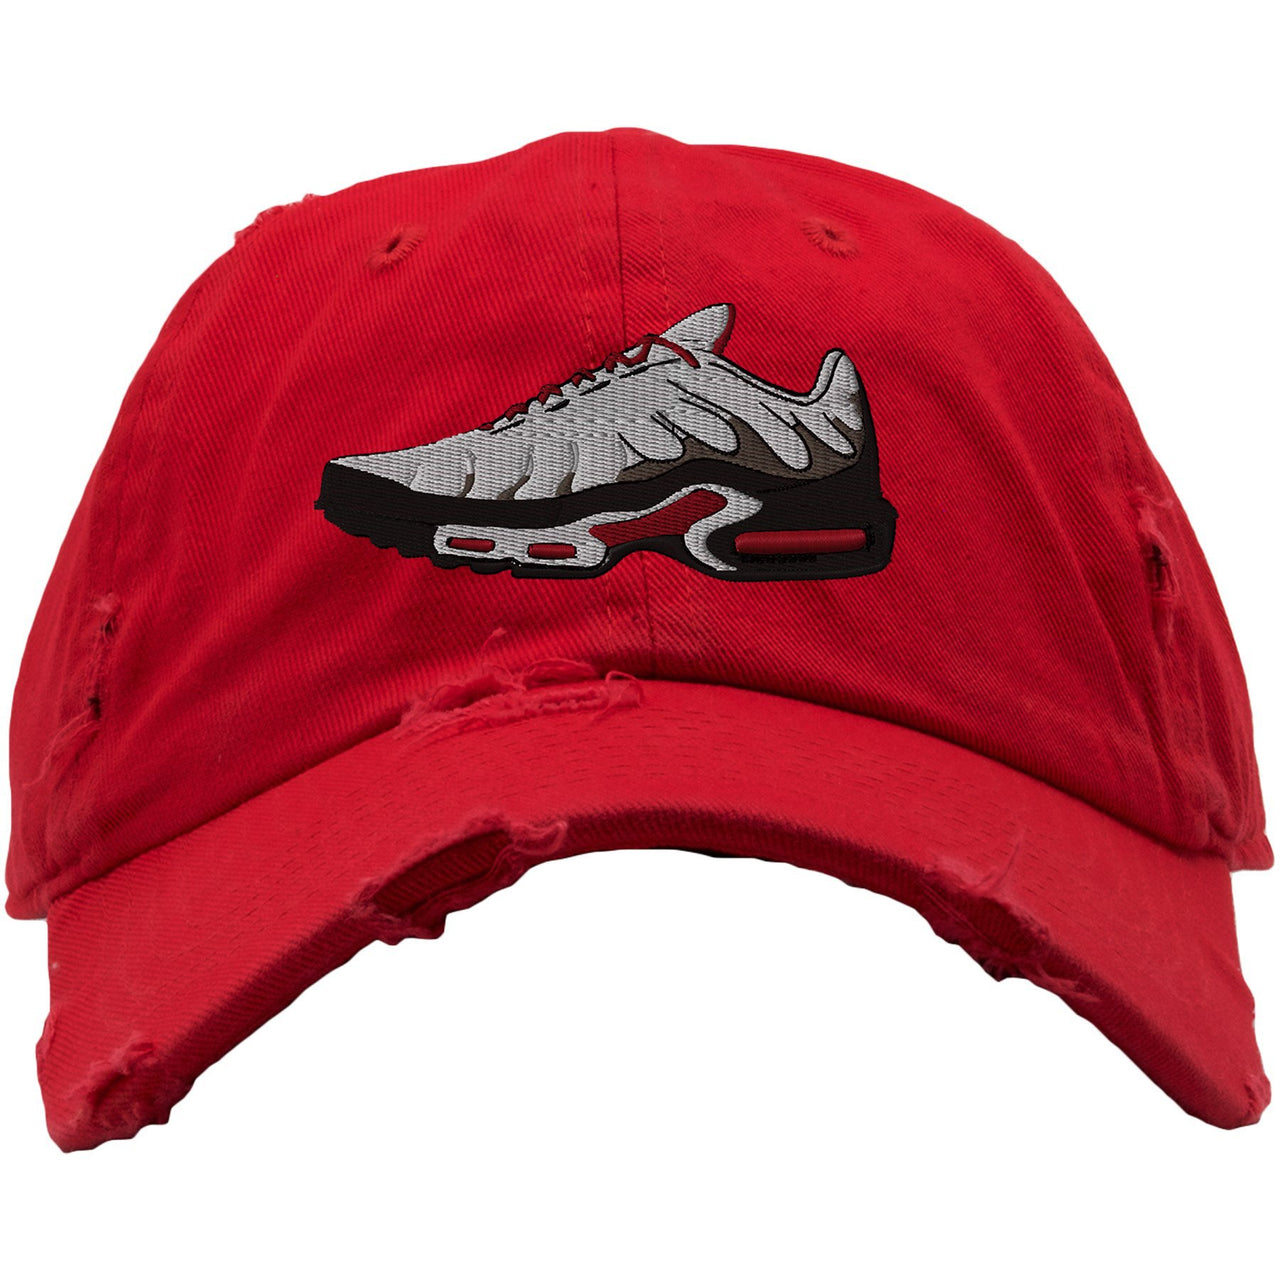 White University Red Pluses Distressed Dad Hat | Shoe, Red